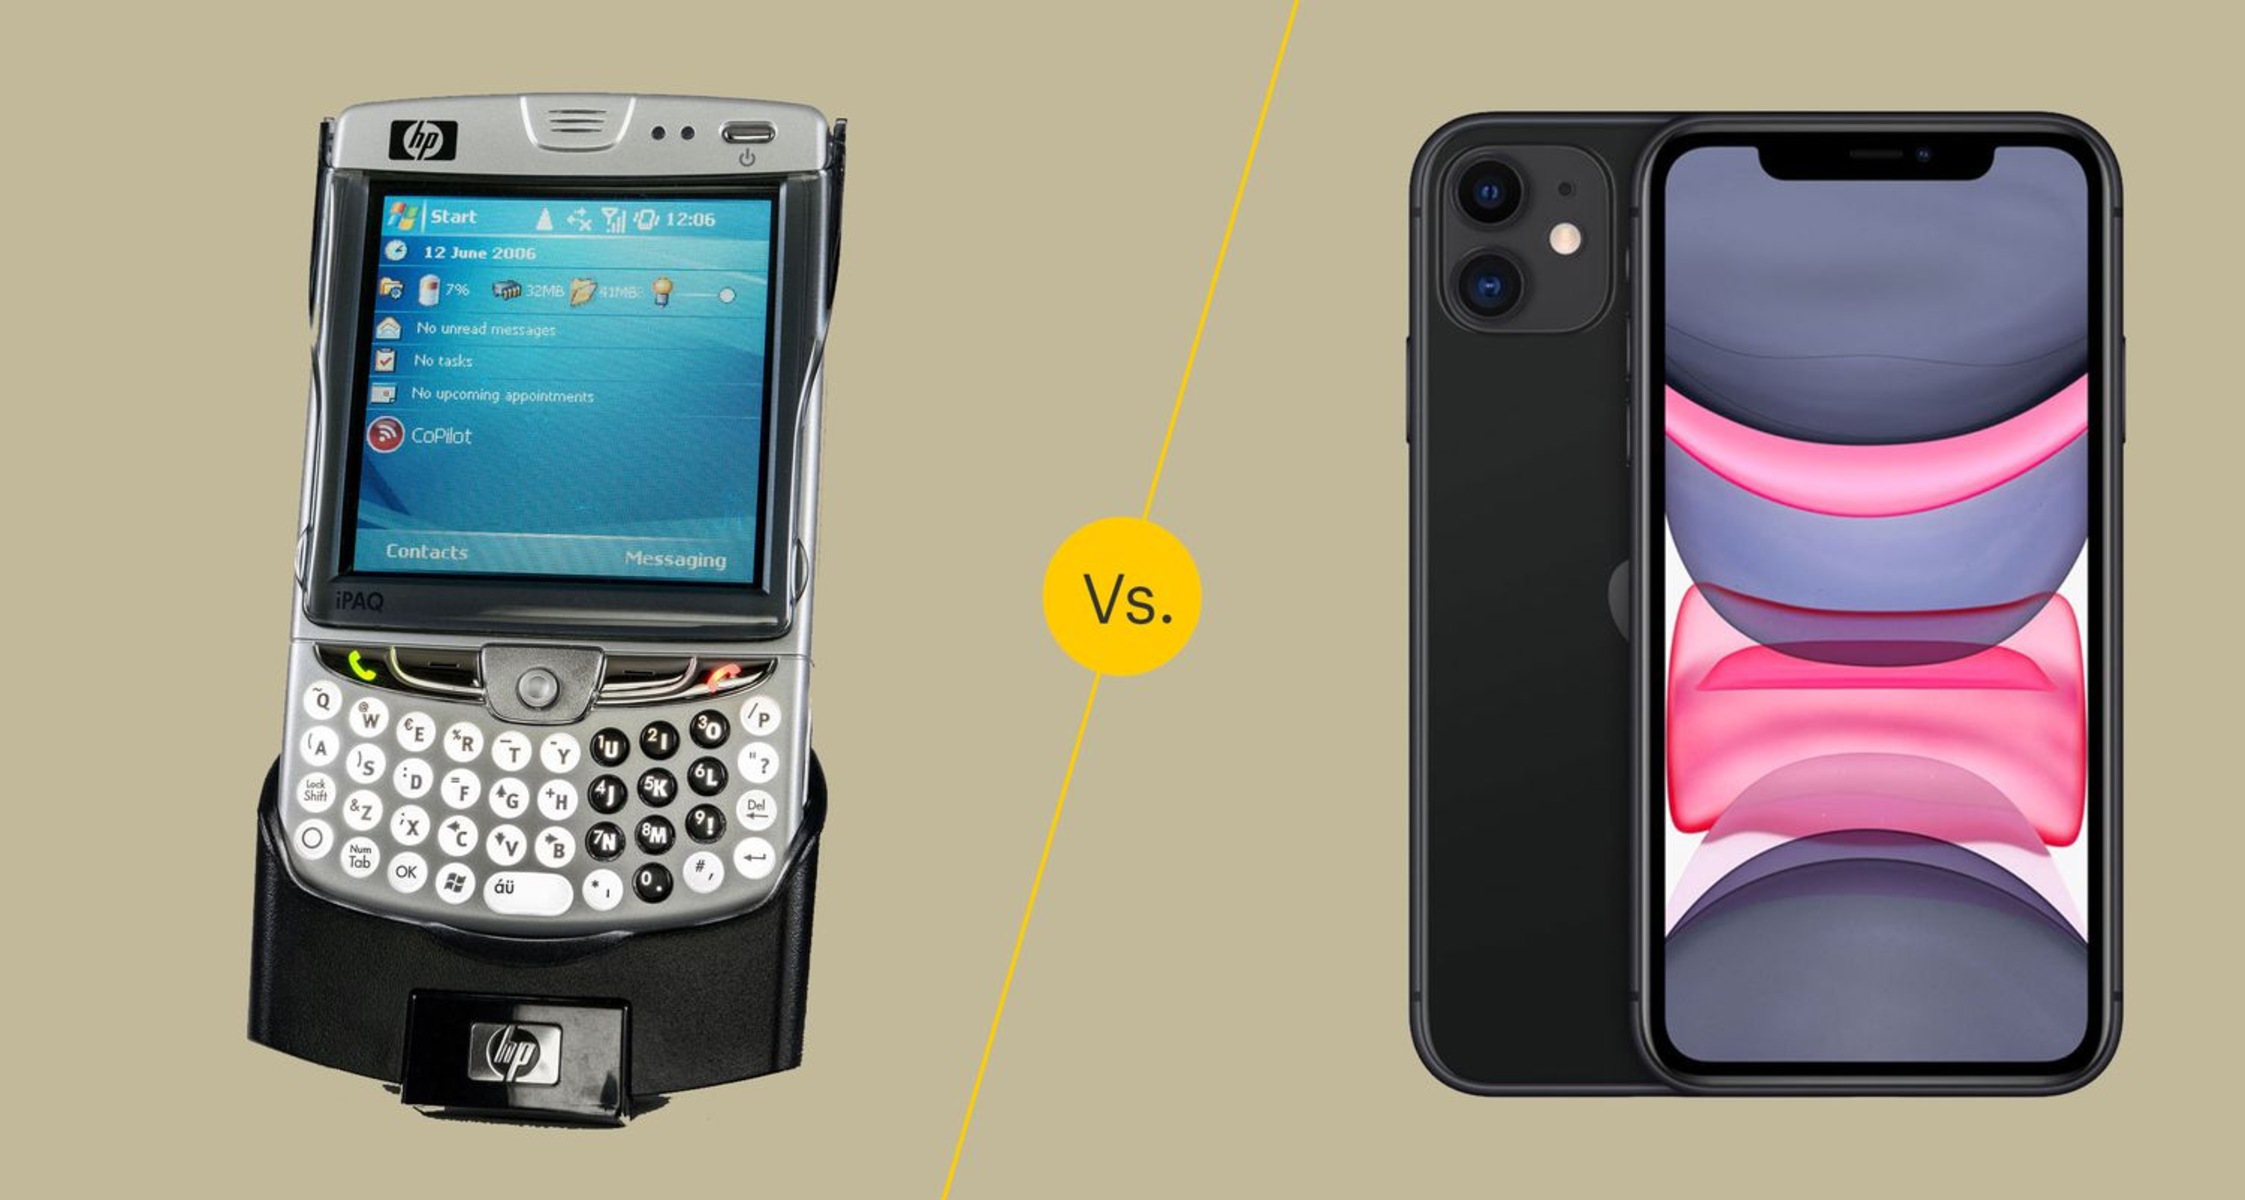 How Is Pda Different Than A Smartphone